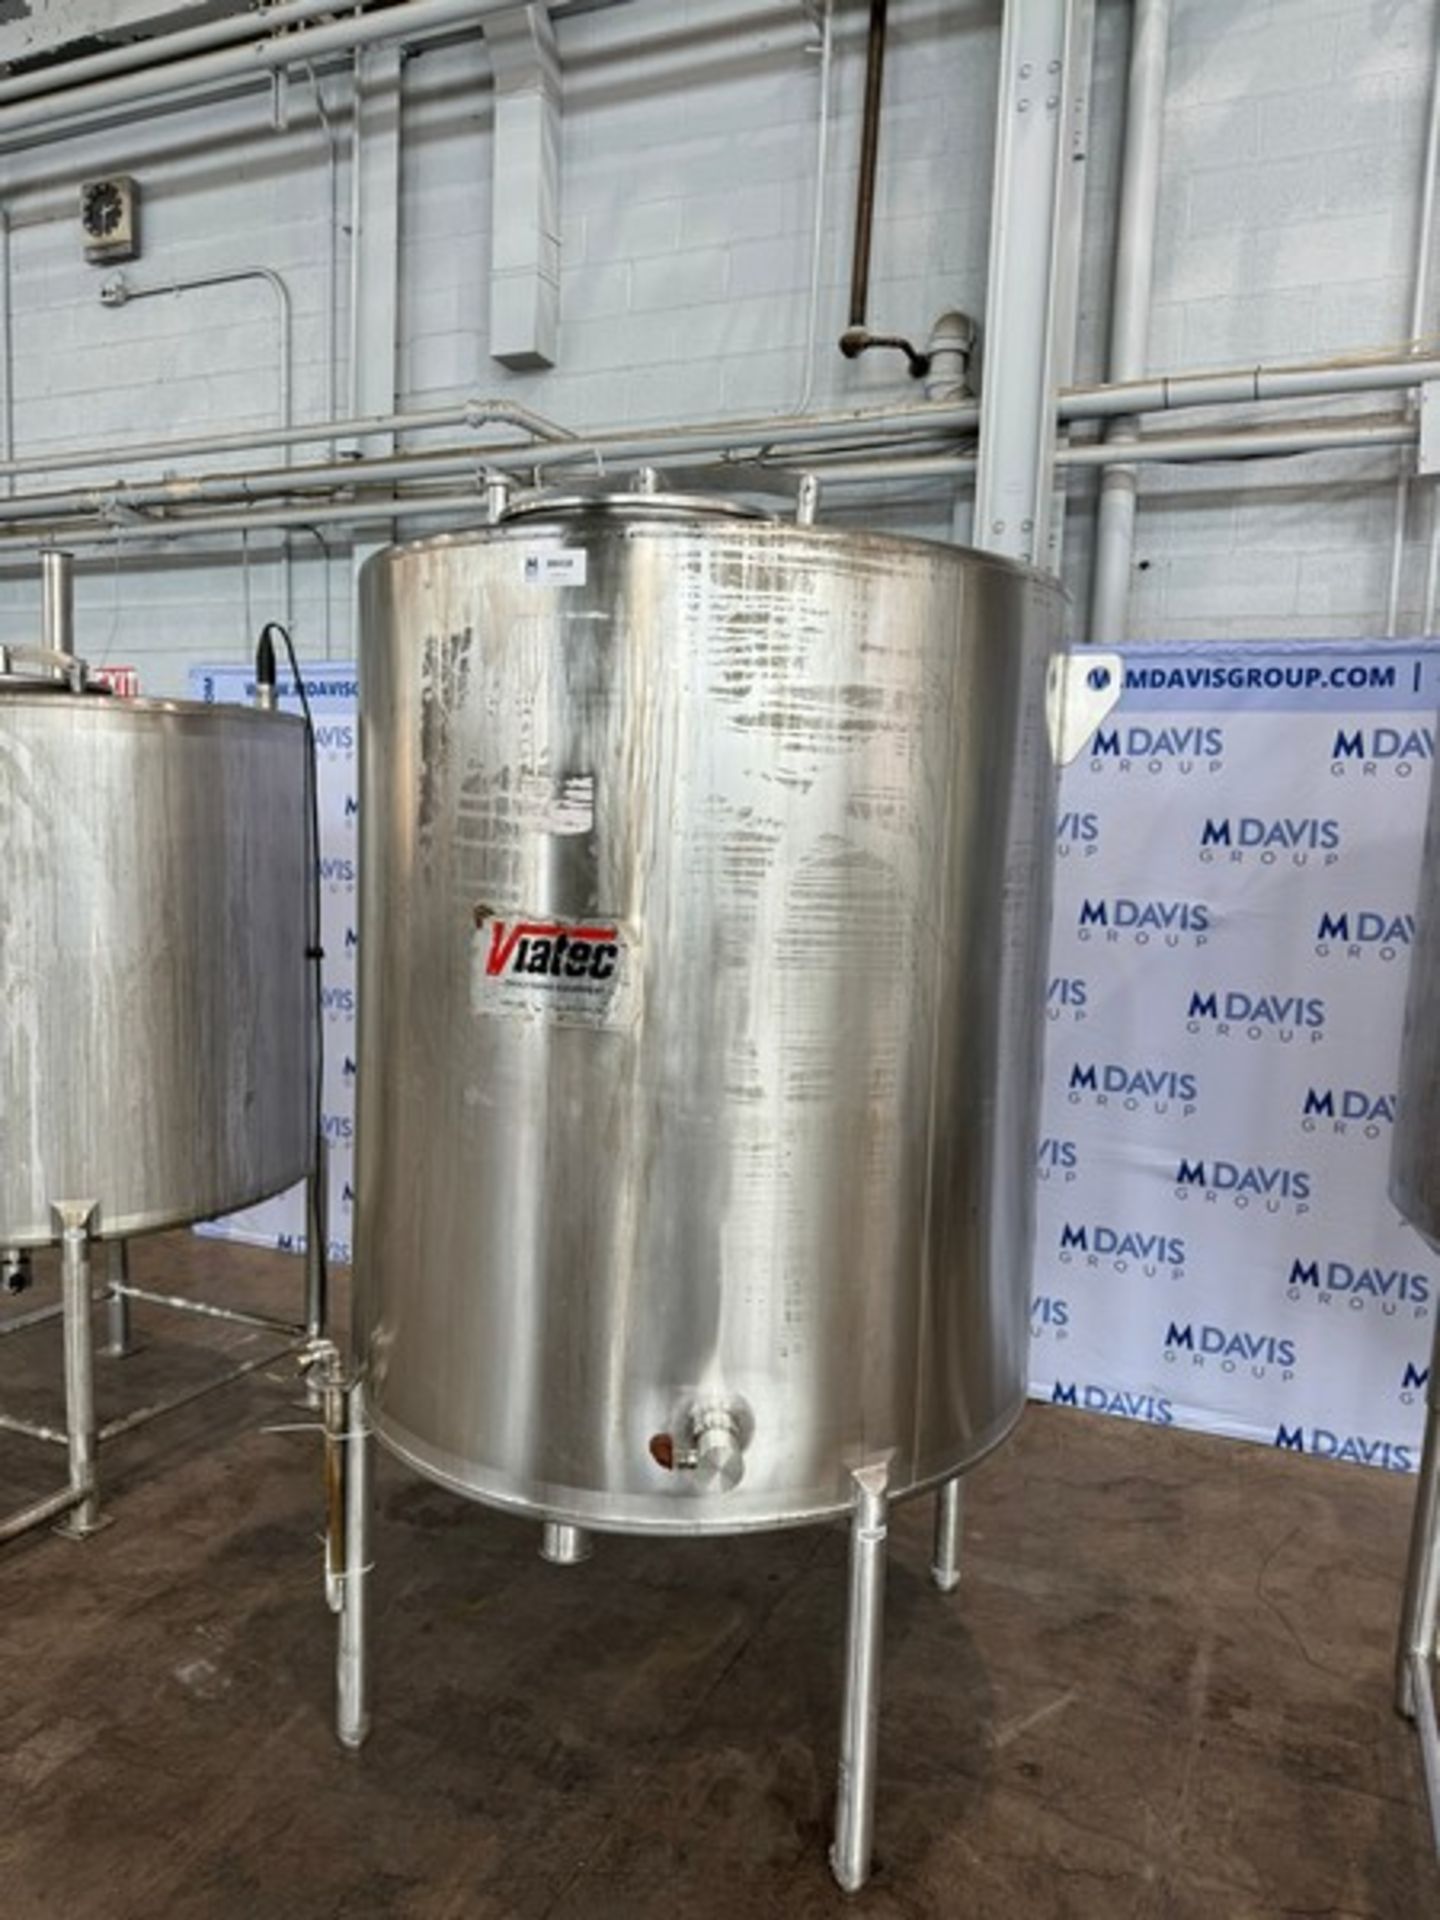 Viatec Aprox. 500 Gal. S/S Single Wall Tank, Vessel Dims.: Aprox. 57" H x 52" Dia. Mounted on S/S - Image 7 of 11